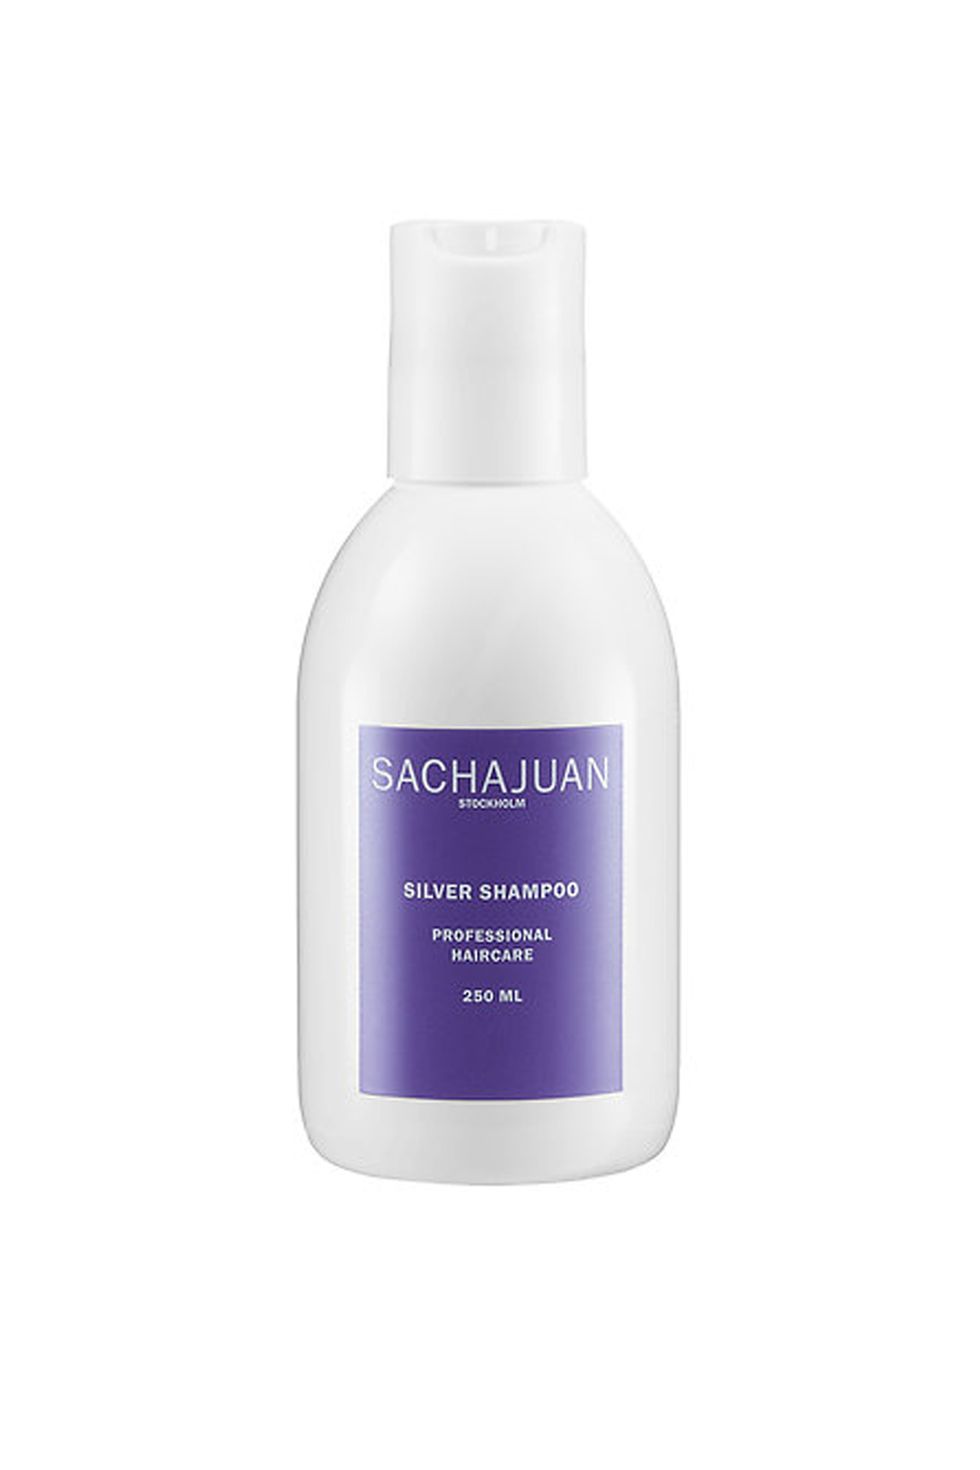 <p>Has purple pigments: You know what that does. Also has UV filters: You know what that does too but are still impressed/<a href="http://www.marieclaire.com/beauty/news/a20983/summer-hair-damage-tips/" target="_blank" data-tracking-id="recirc-text-link">worried about your hair needing SPF</a>.&nbsp;</p><p>Sachajuan Silver Shampoo, $31, <a href="http://www.sephora.com/silver-shampoo-P378304?skuId=1851765&amp;icid2=products%20grid:p378304" target="_blank" data-tracking-id="recirc-text-link">sephora.com</a>.</p>